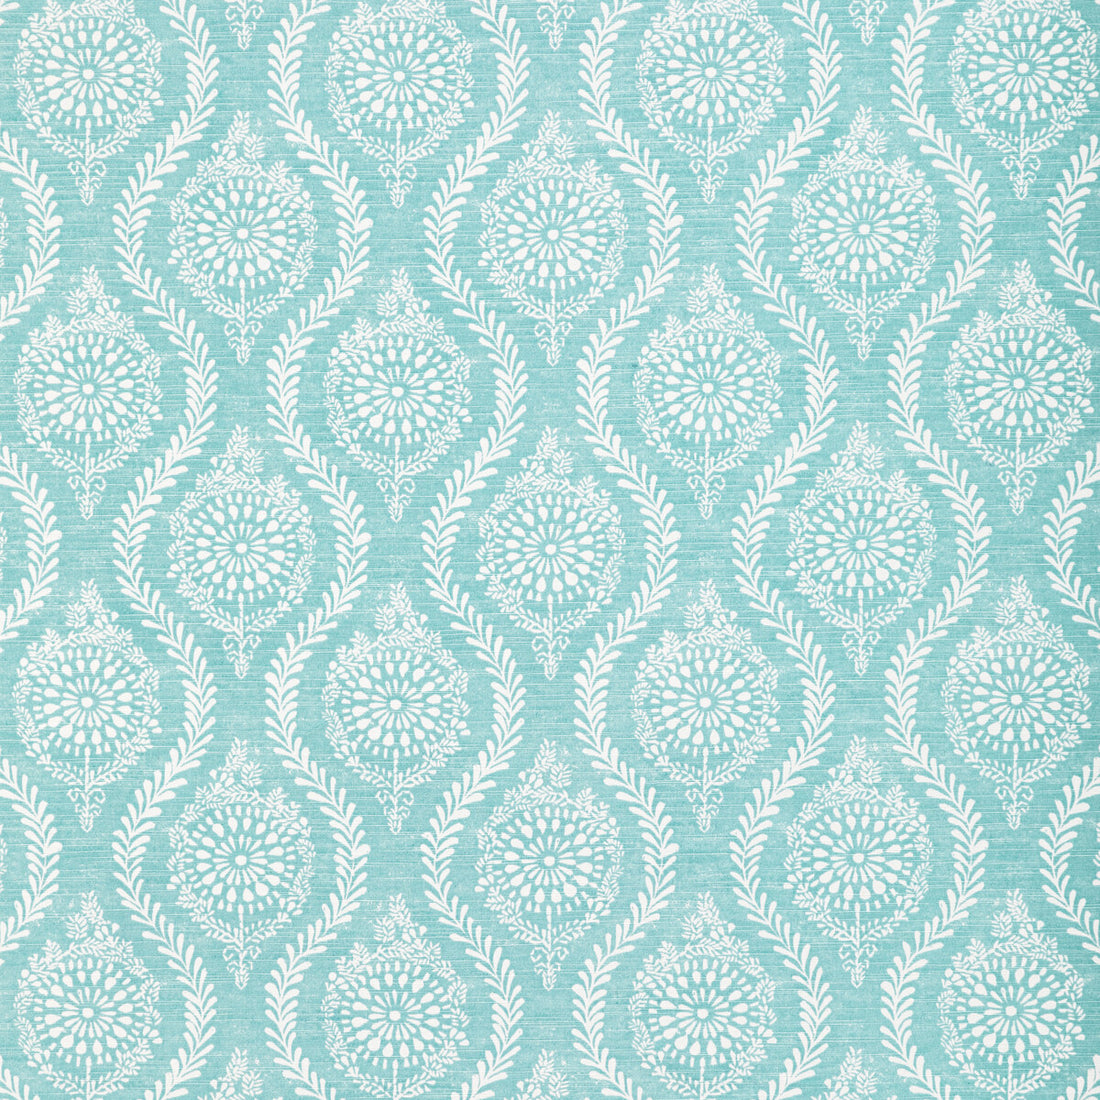 Marindol Print fabric in aqua color - pattern 8022105.13.0 - by Brunschwig &amp; Fils in the Manoir collection